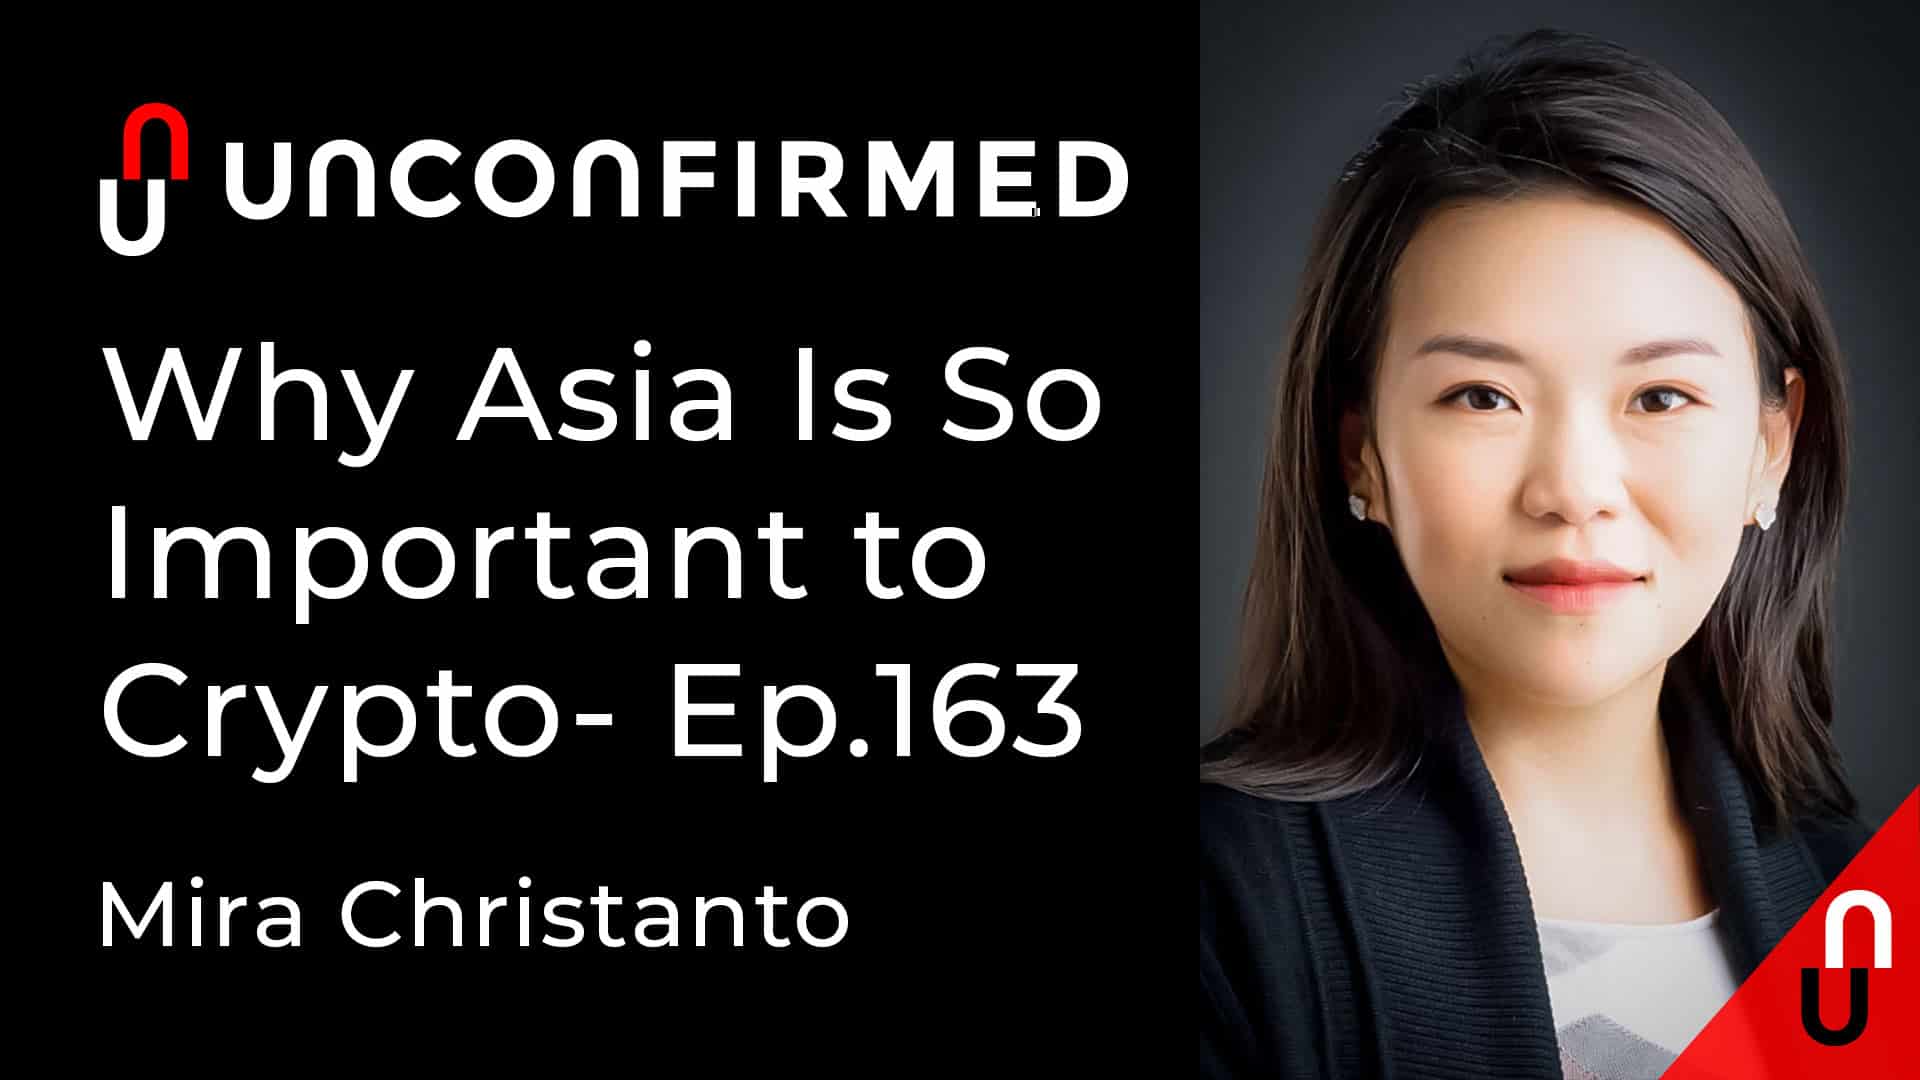 Unconfirmed - Ep.163 - Why Asia Is So Important to Crypto